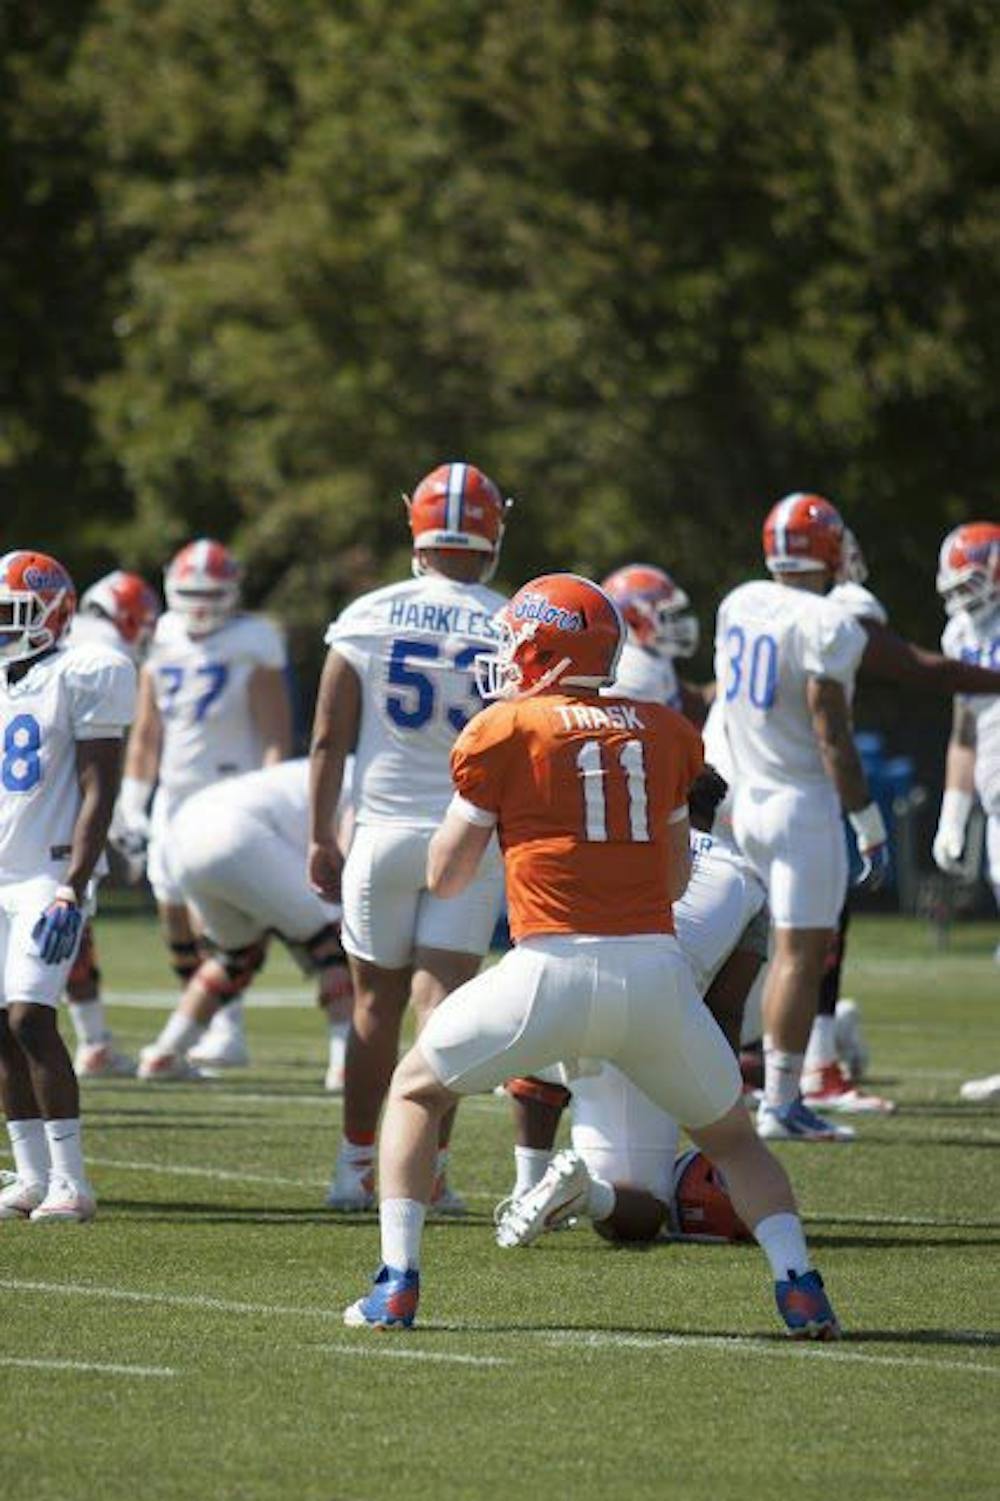 <p>UF quarterback Kyle Trask drops back to pass during a spring practice at the Sanders Practice Field on March 22, 2017.</p>